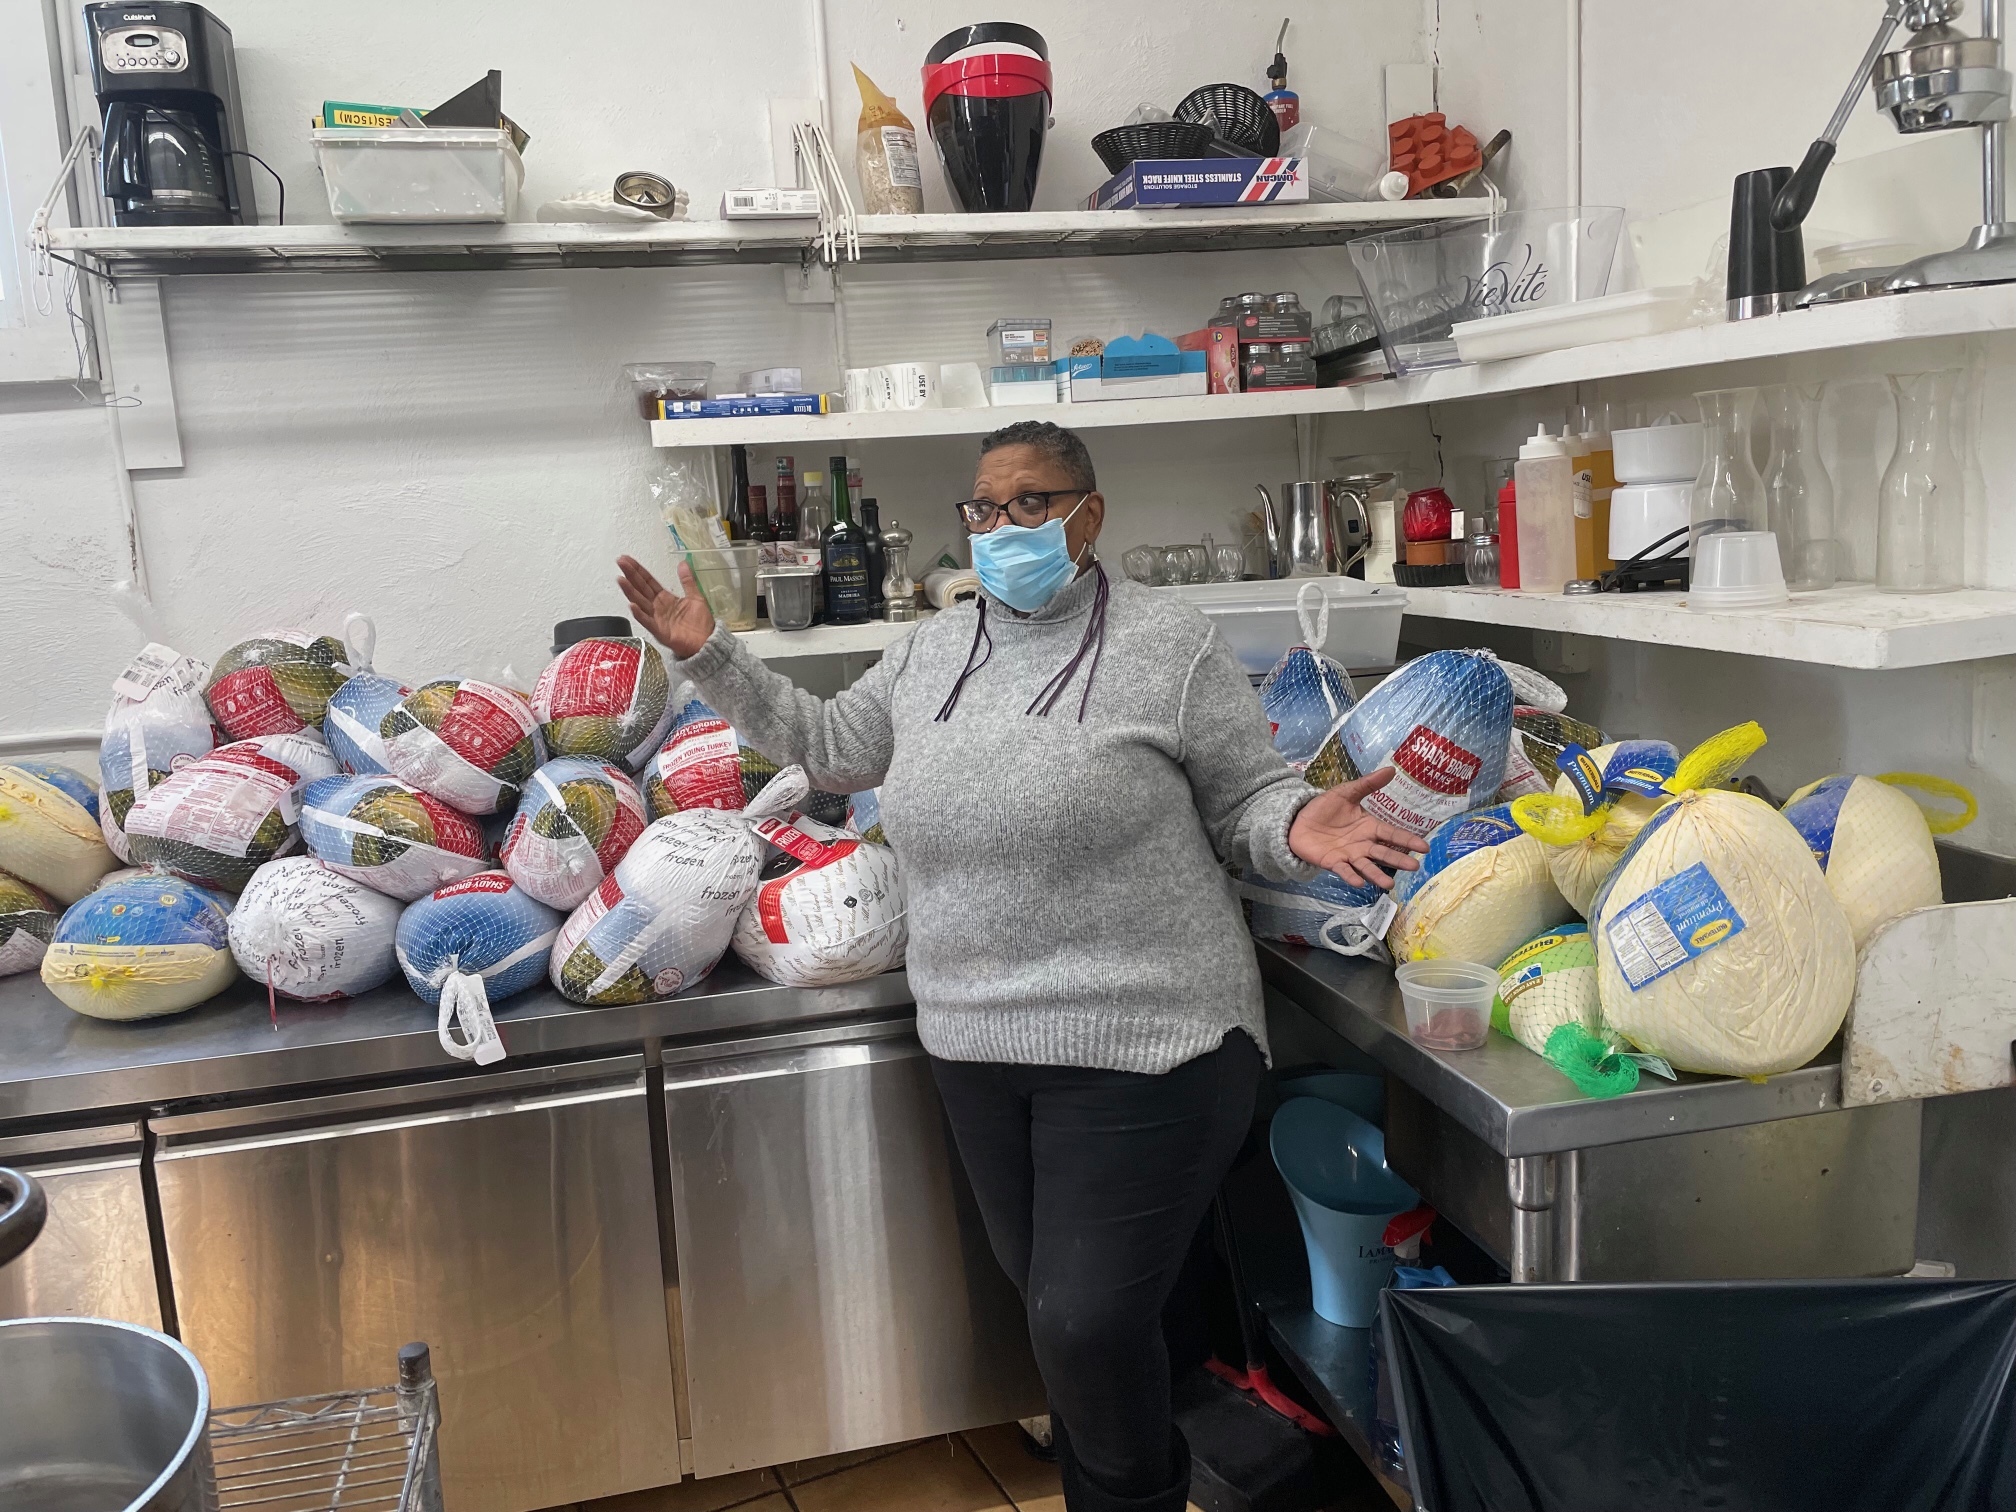 Southampton resident Denise Smith-Meacham organized a free Thanksgiving dinner for those in need, and delivery to those who are home bound. With help from volunteers, the dinner was prepared at the Southampton United Methodist Church.